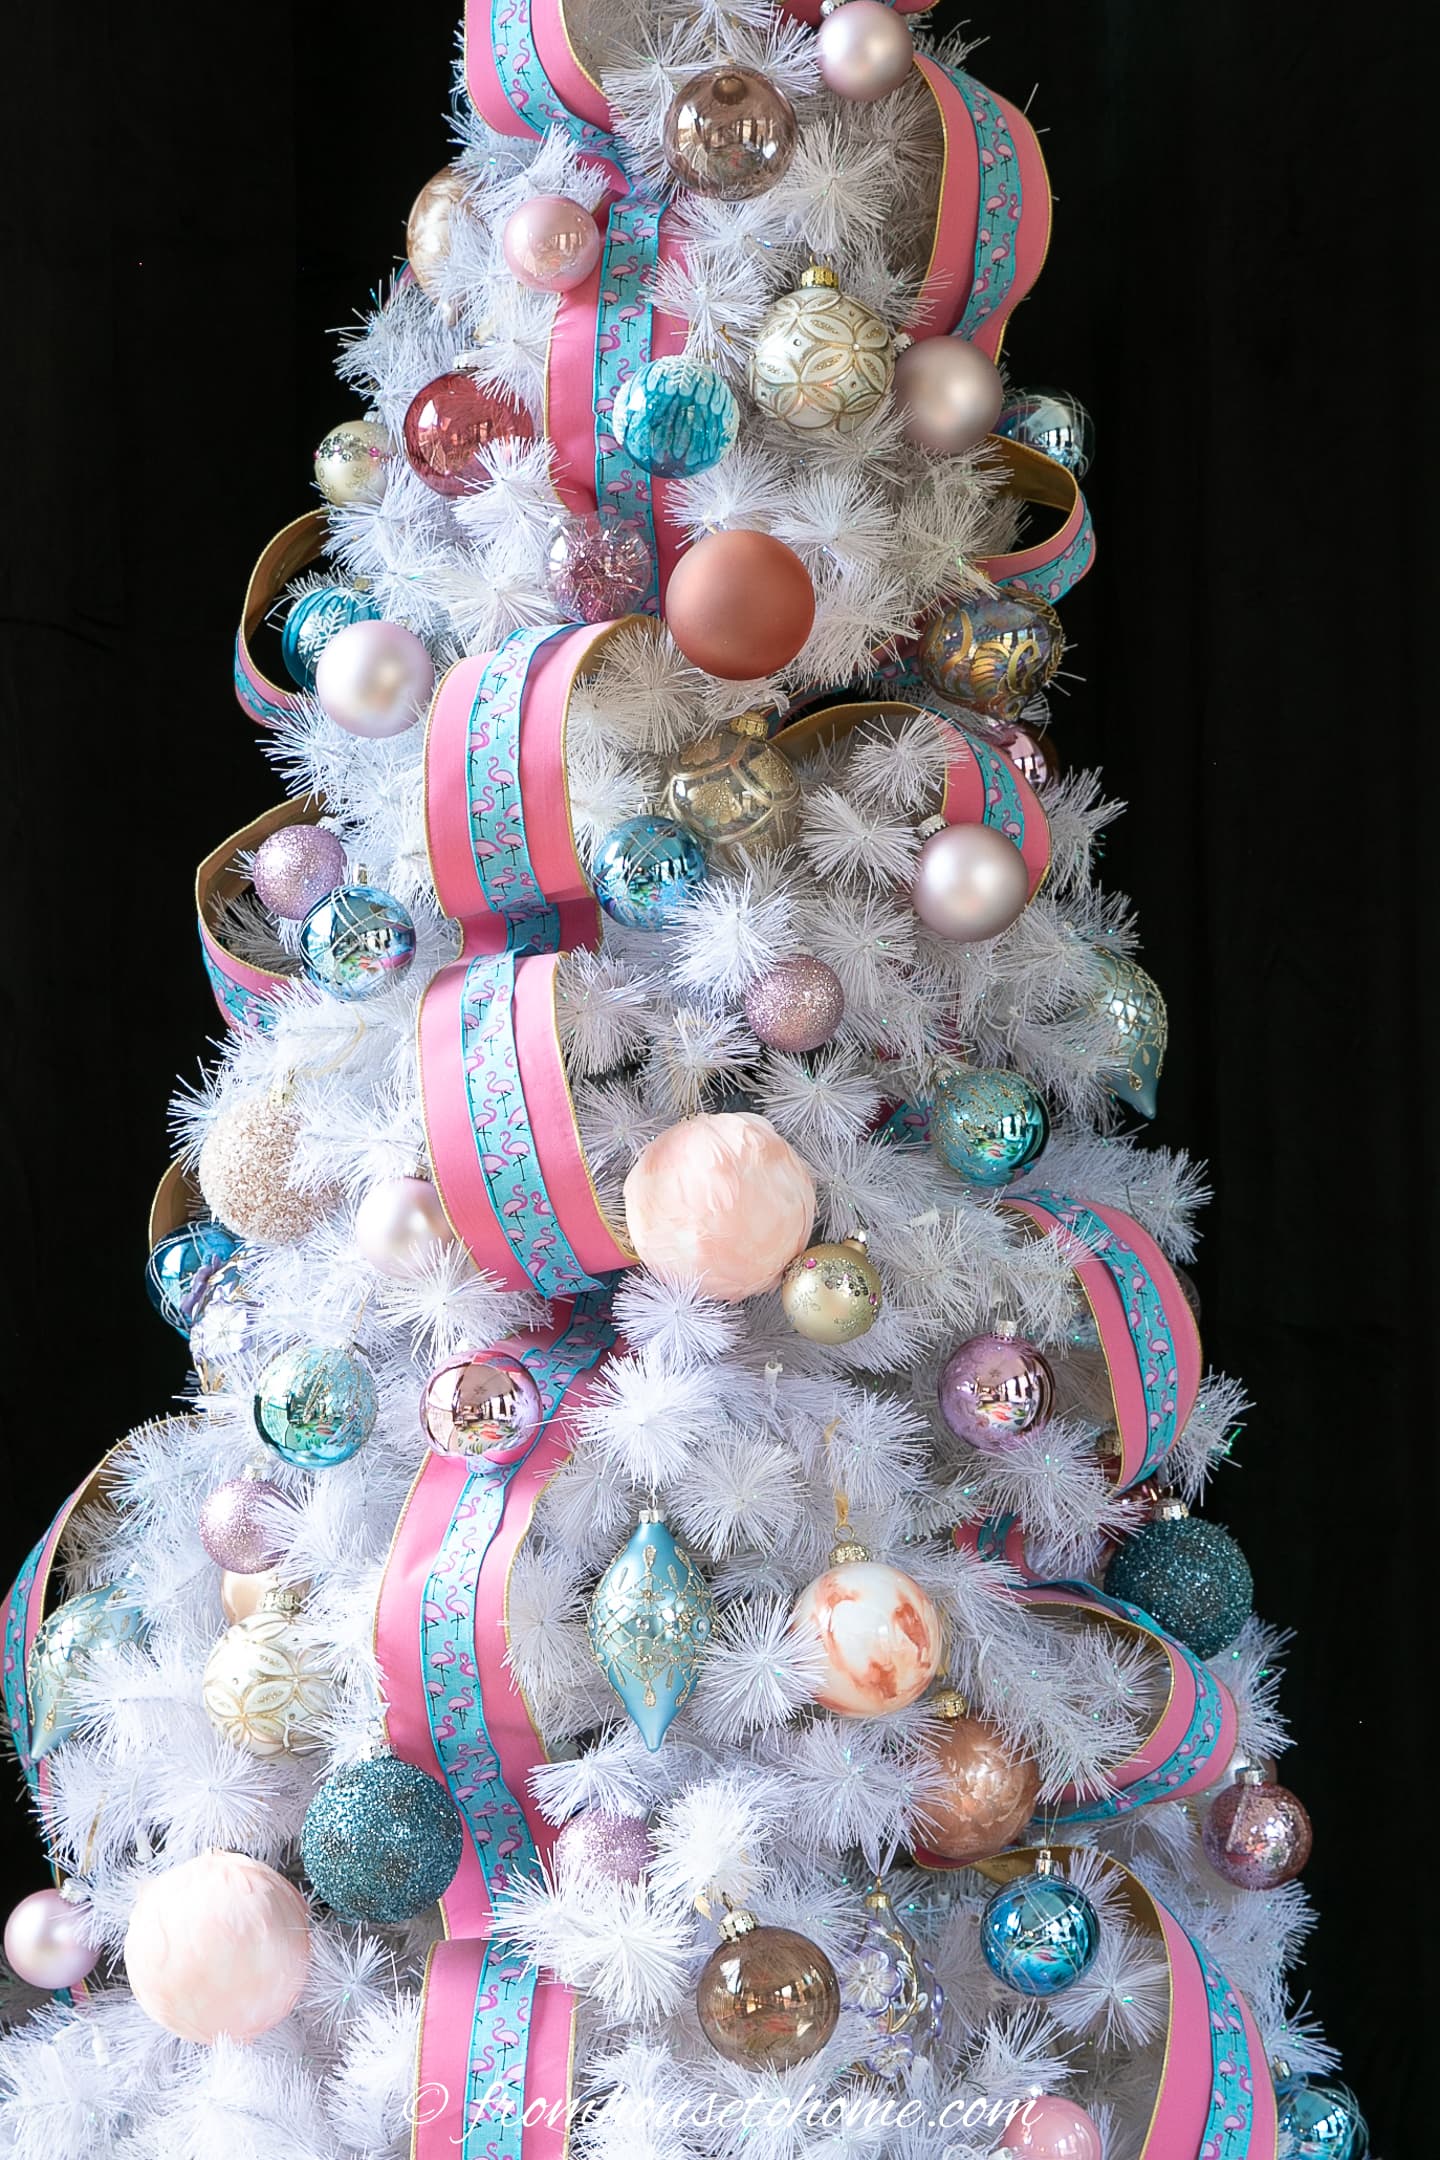 A close up of a partially decorated Christmas white tree with pink and teal ornaments